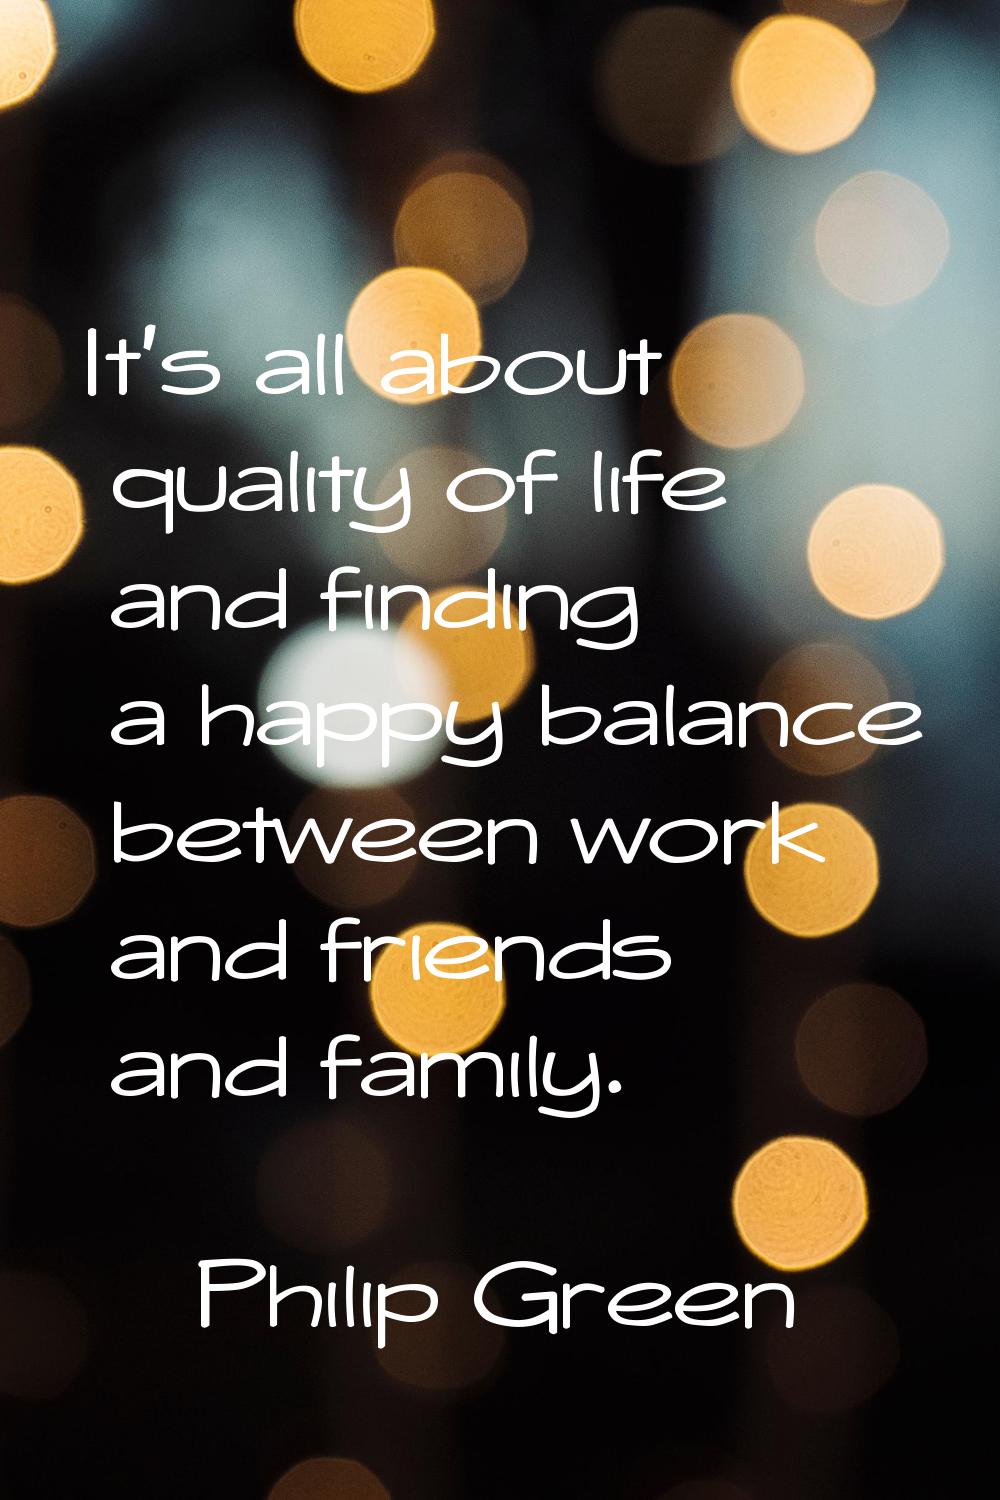 It's all about quality of life and finding a happy balance between work and friends and family.